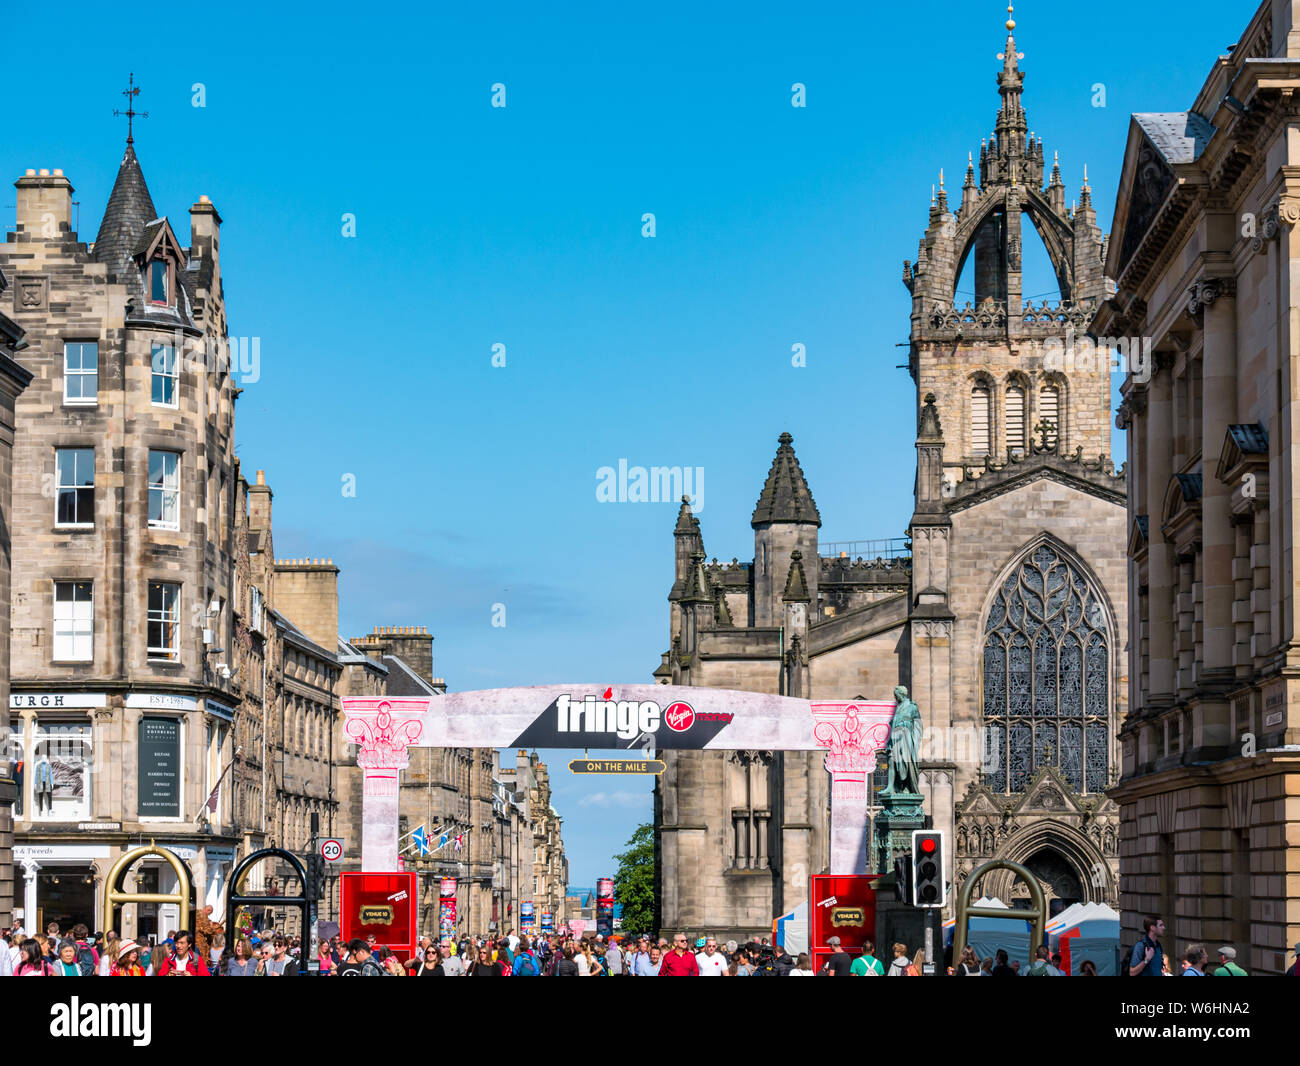 Royal Mile, Edinburgh, Scotland, United Kingdom, 1 August 2019. On the day before the official opening of the Fringe festival, the centre of the city along its main tourist route is heaving with visitors. The Fringe grows each year and residents question whether continued growth is sustainable.  The Virgin Money sponsored street venue with St Giles Cathedral Stock Photo